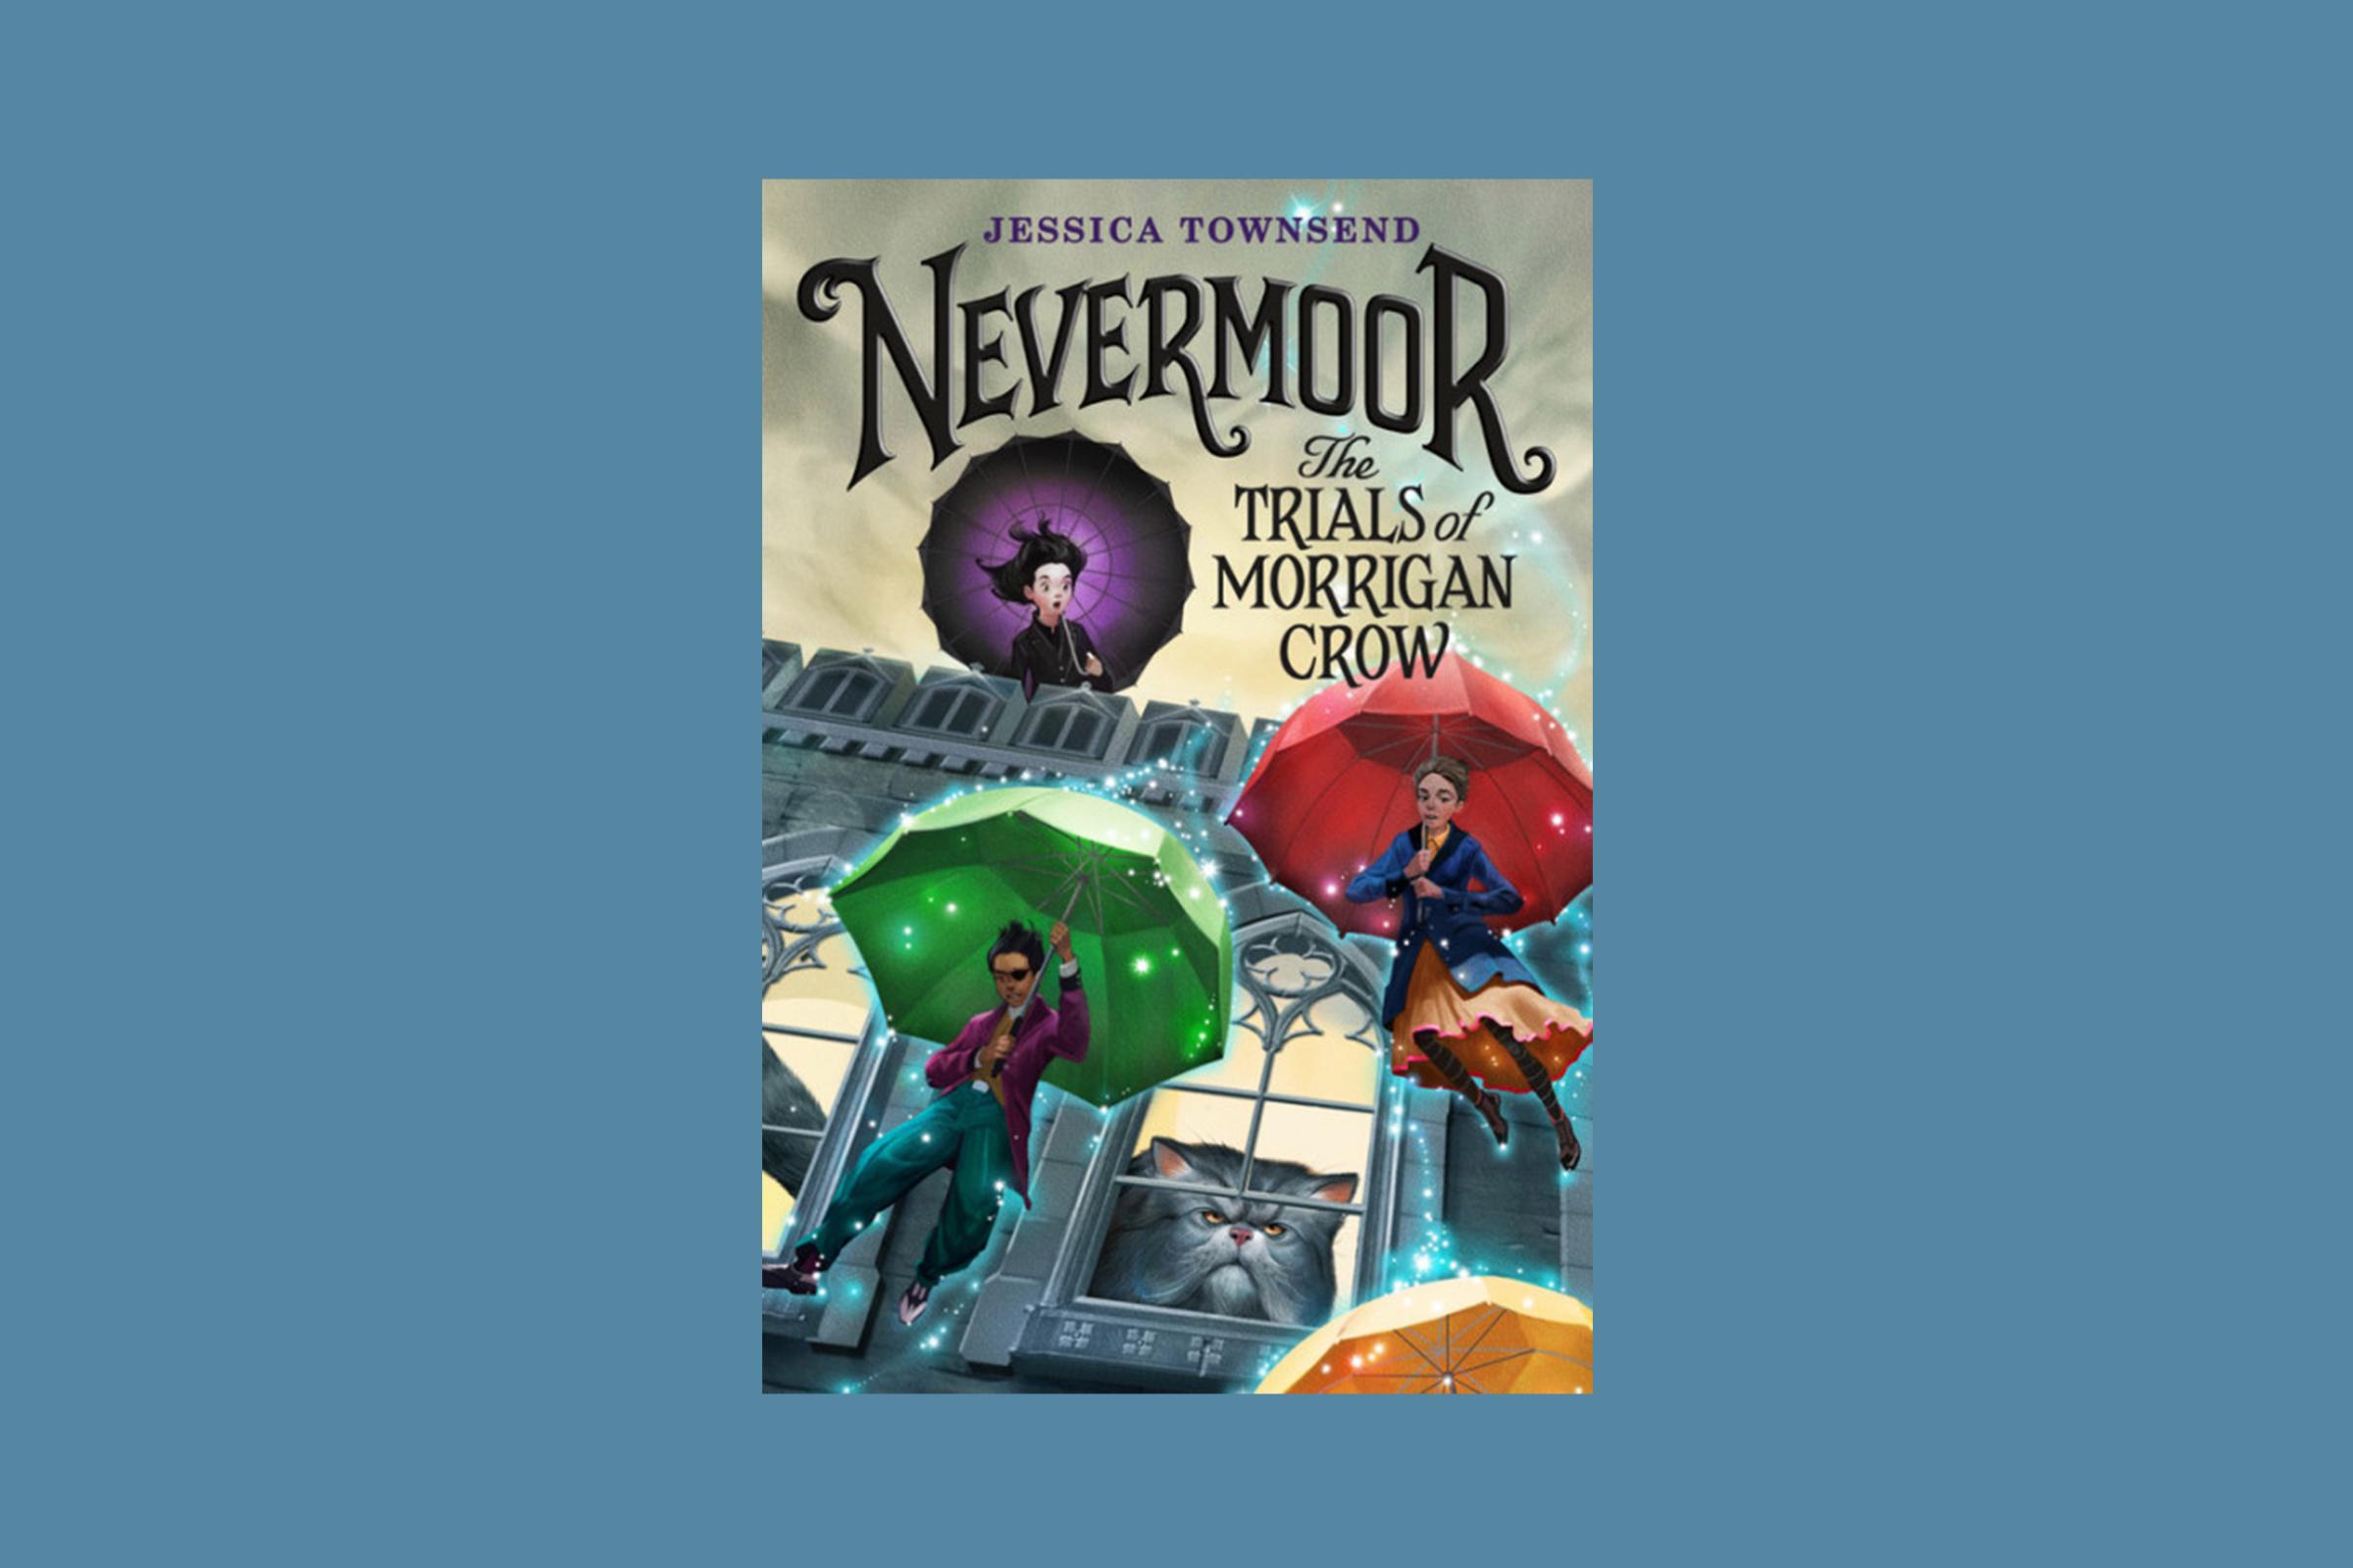 Nevermoor: The Trials of Morrrigan Crow is one of the top 10 young adult books of 2017